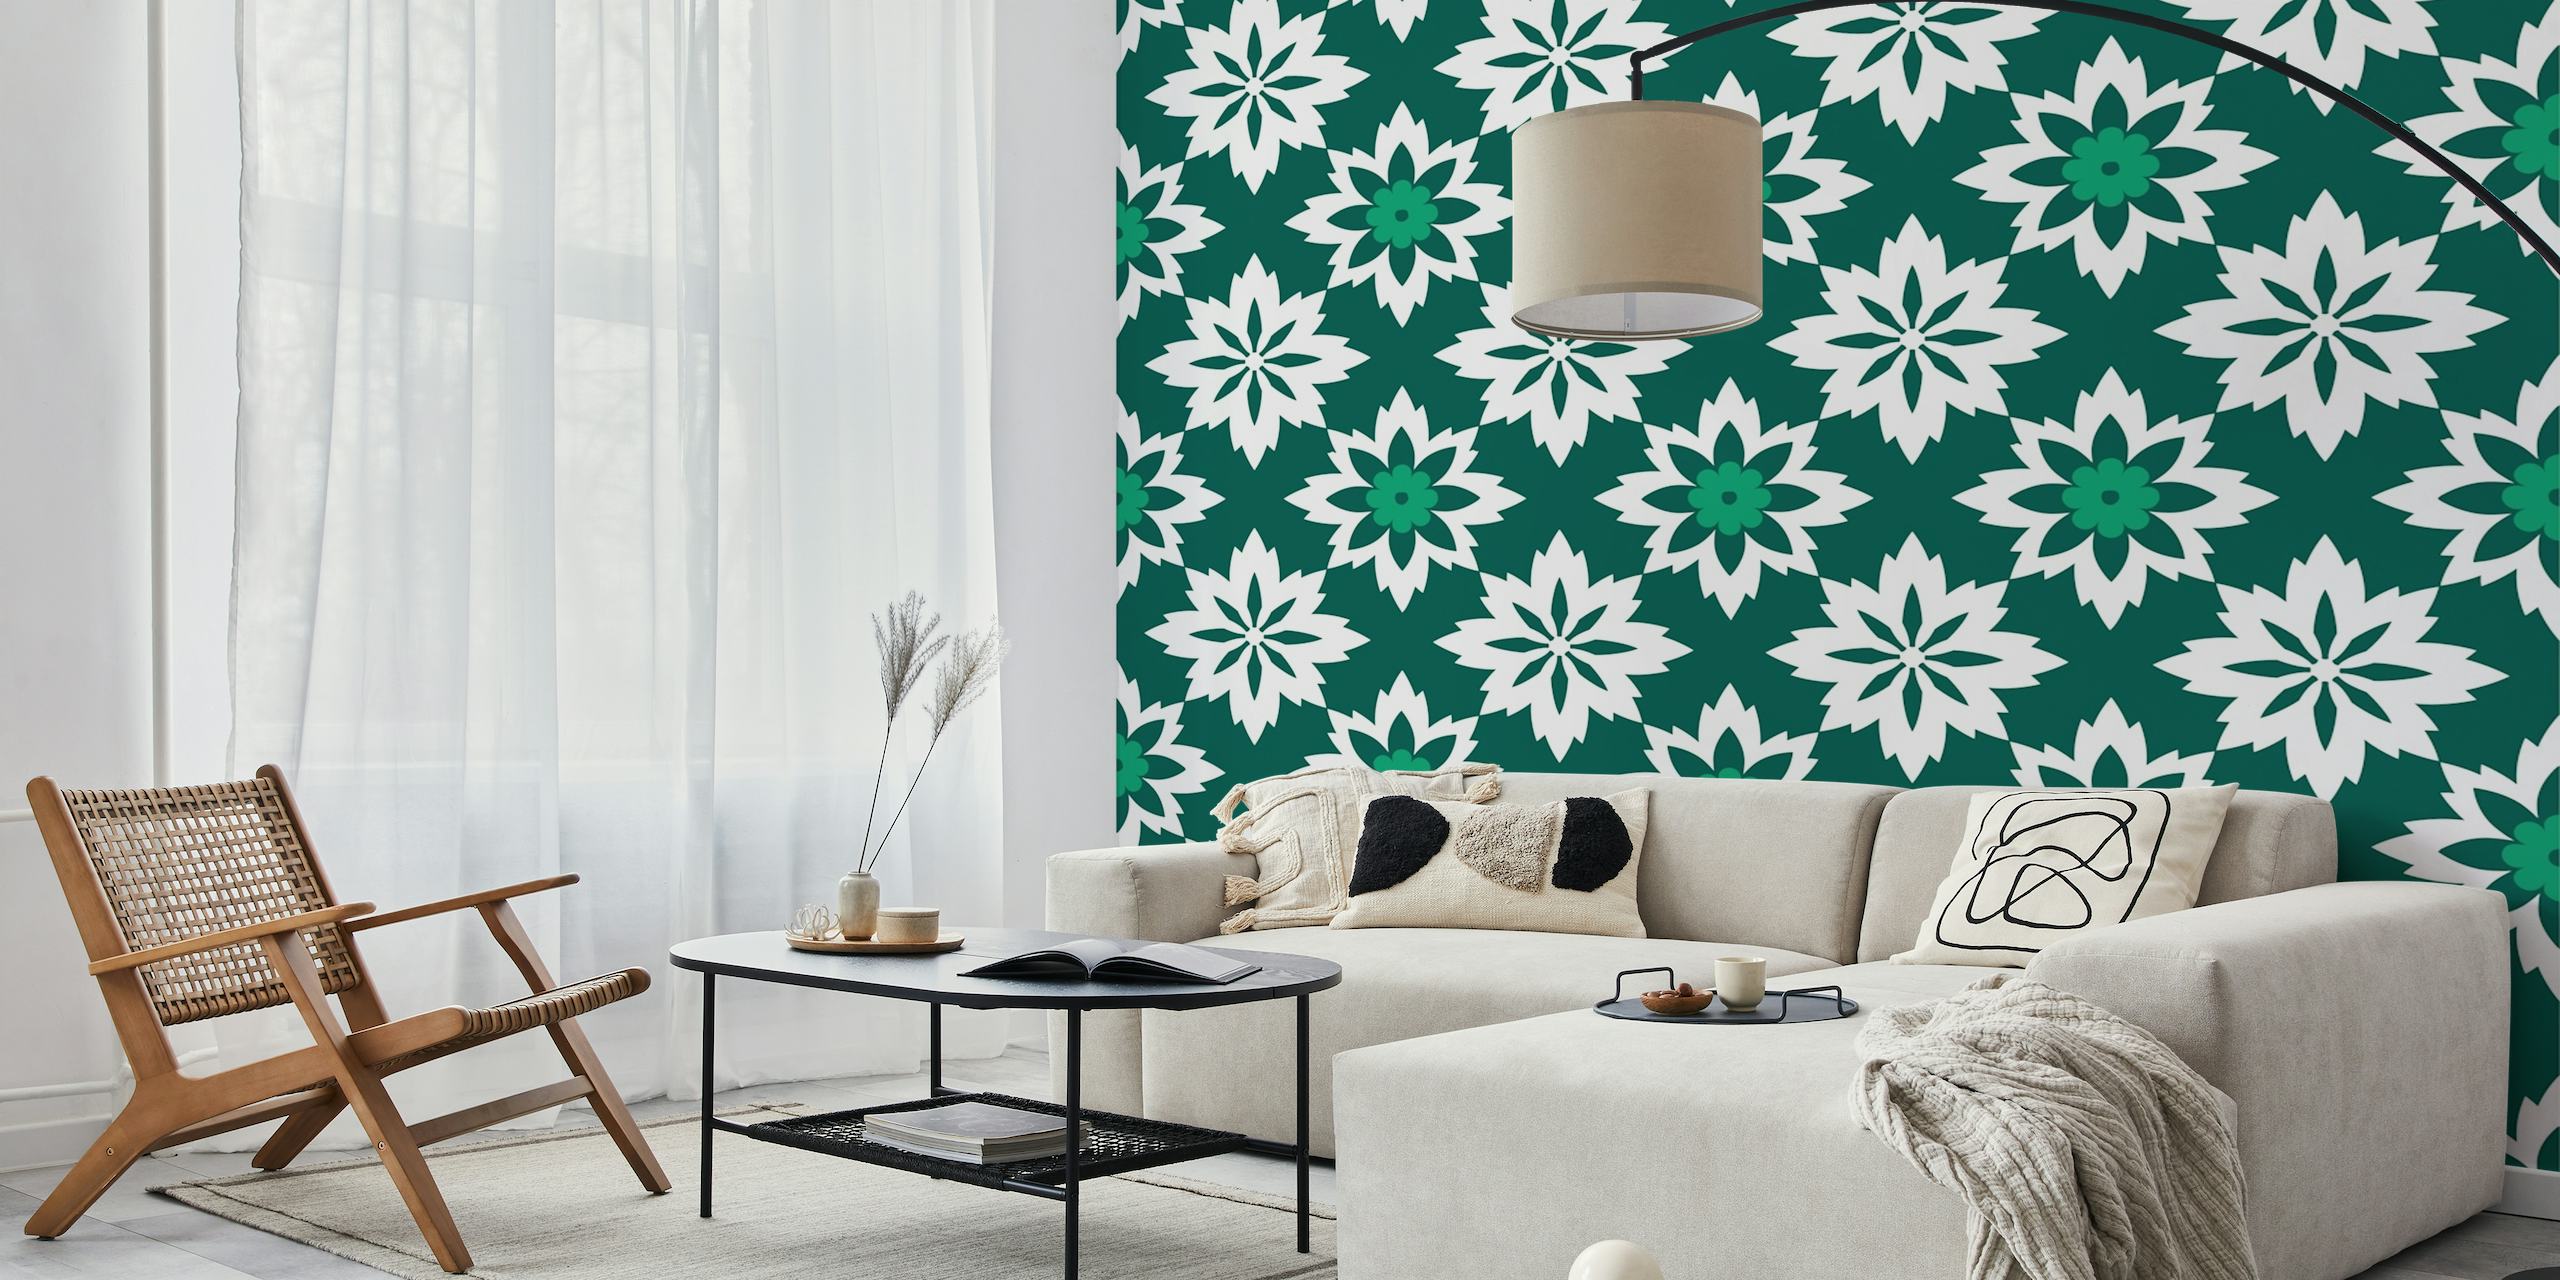 Morrocan abstract floral pattern forest green ταπετσαρία